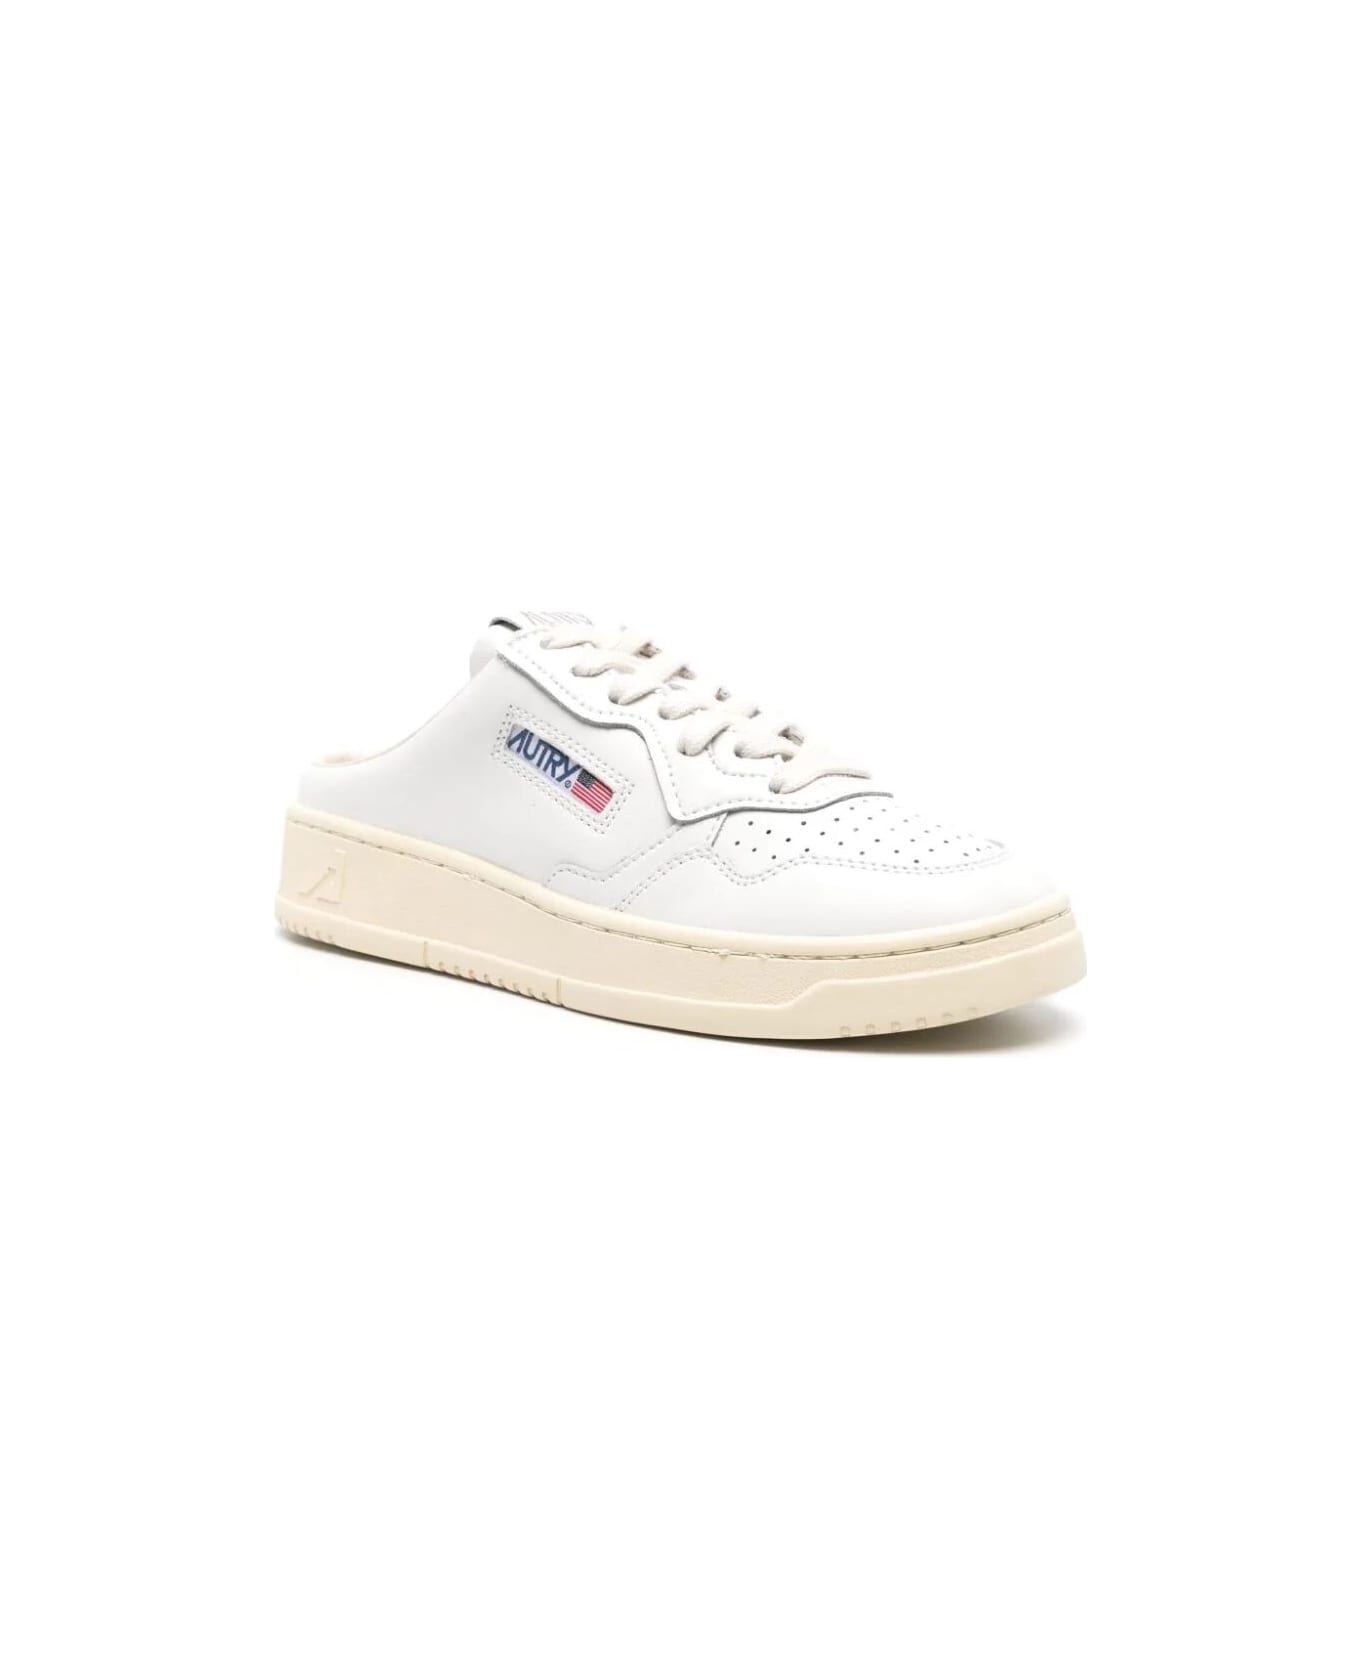 Autry Low Mule - White White